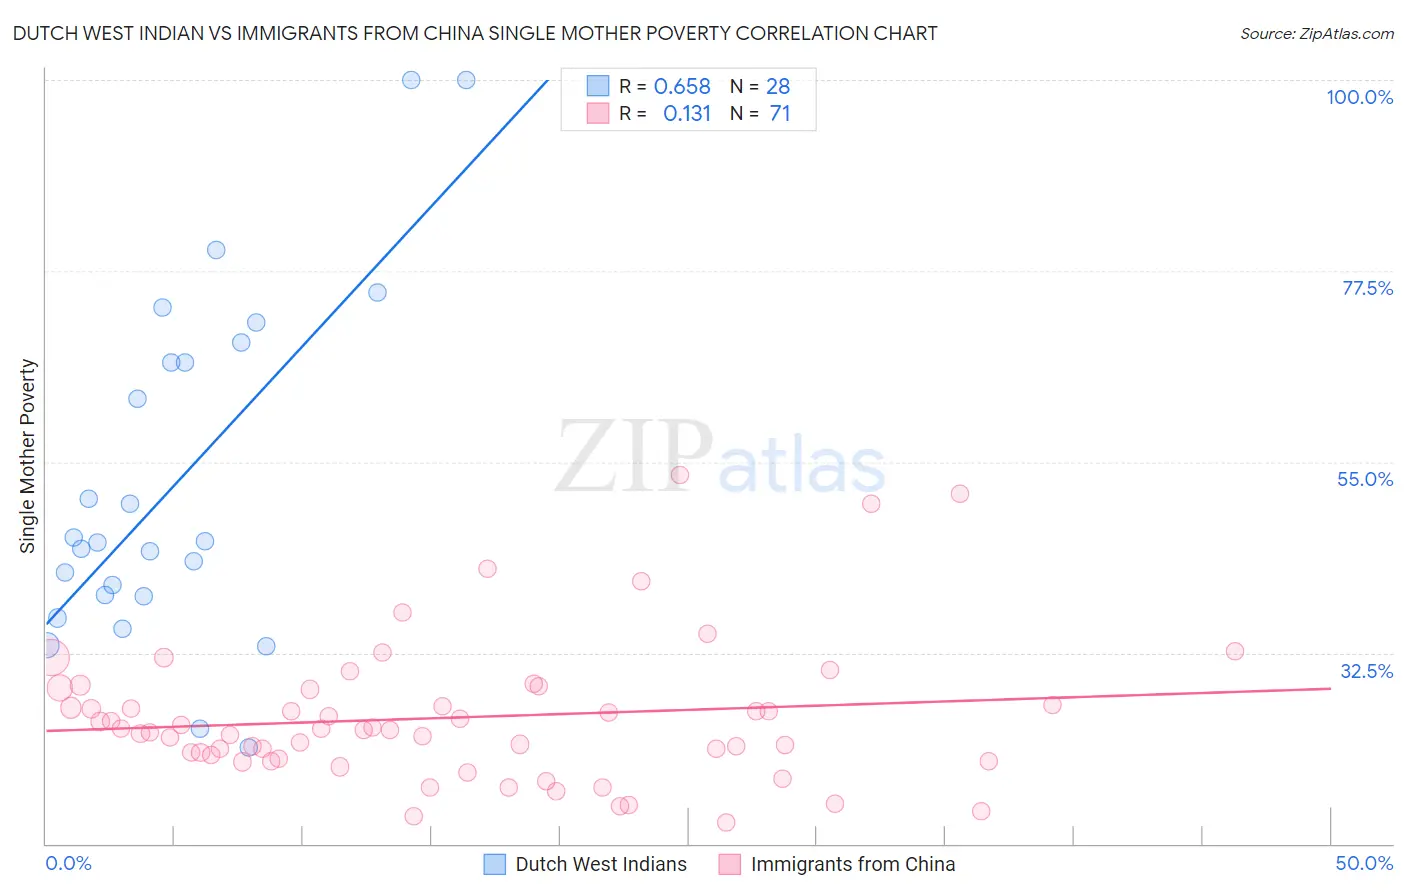 Dutch West Indian vs Immigrants from China Single Mother Poverty